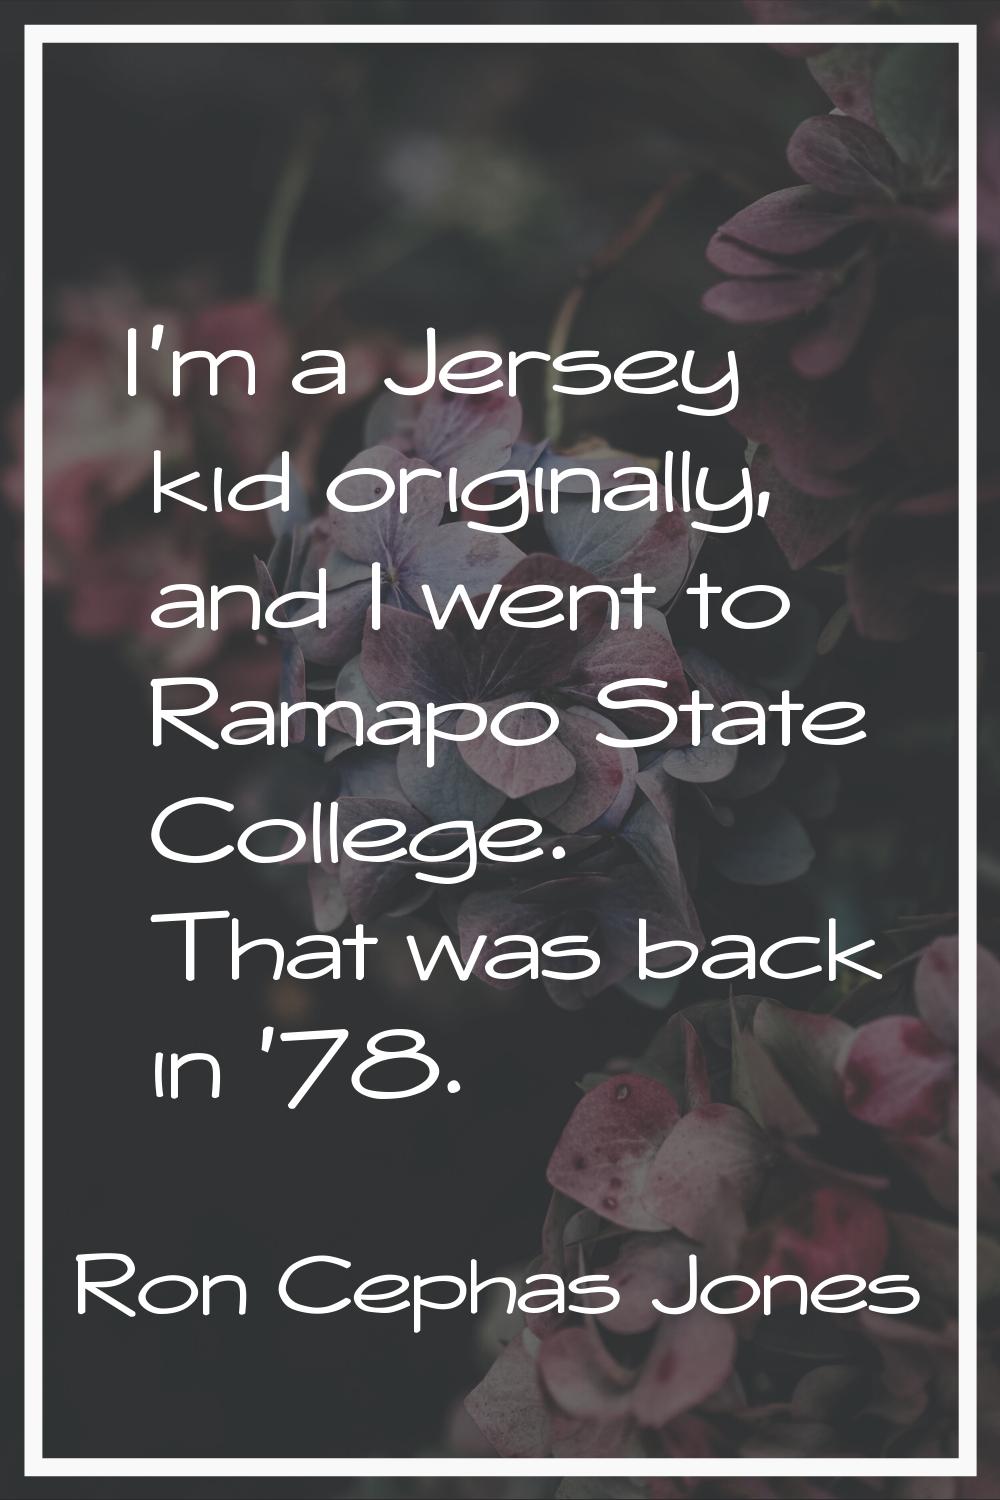 I'm a Jersey kid originally, and I went to Ramapo State College. That was back in '78.